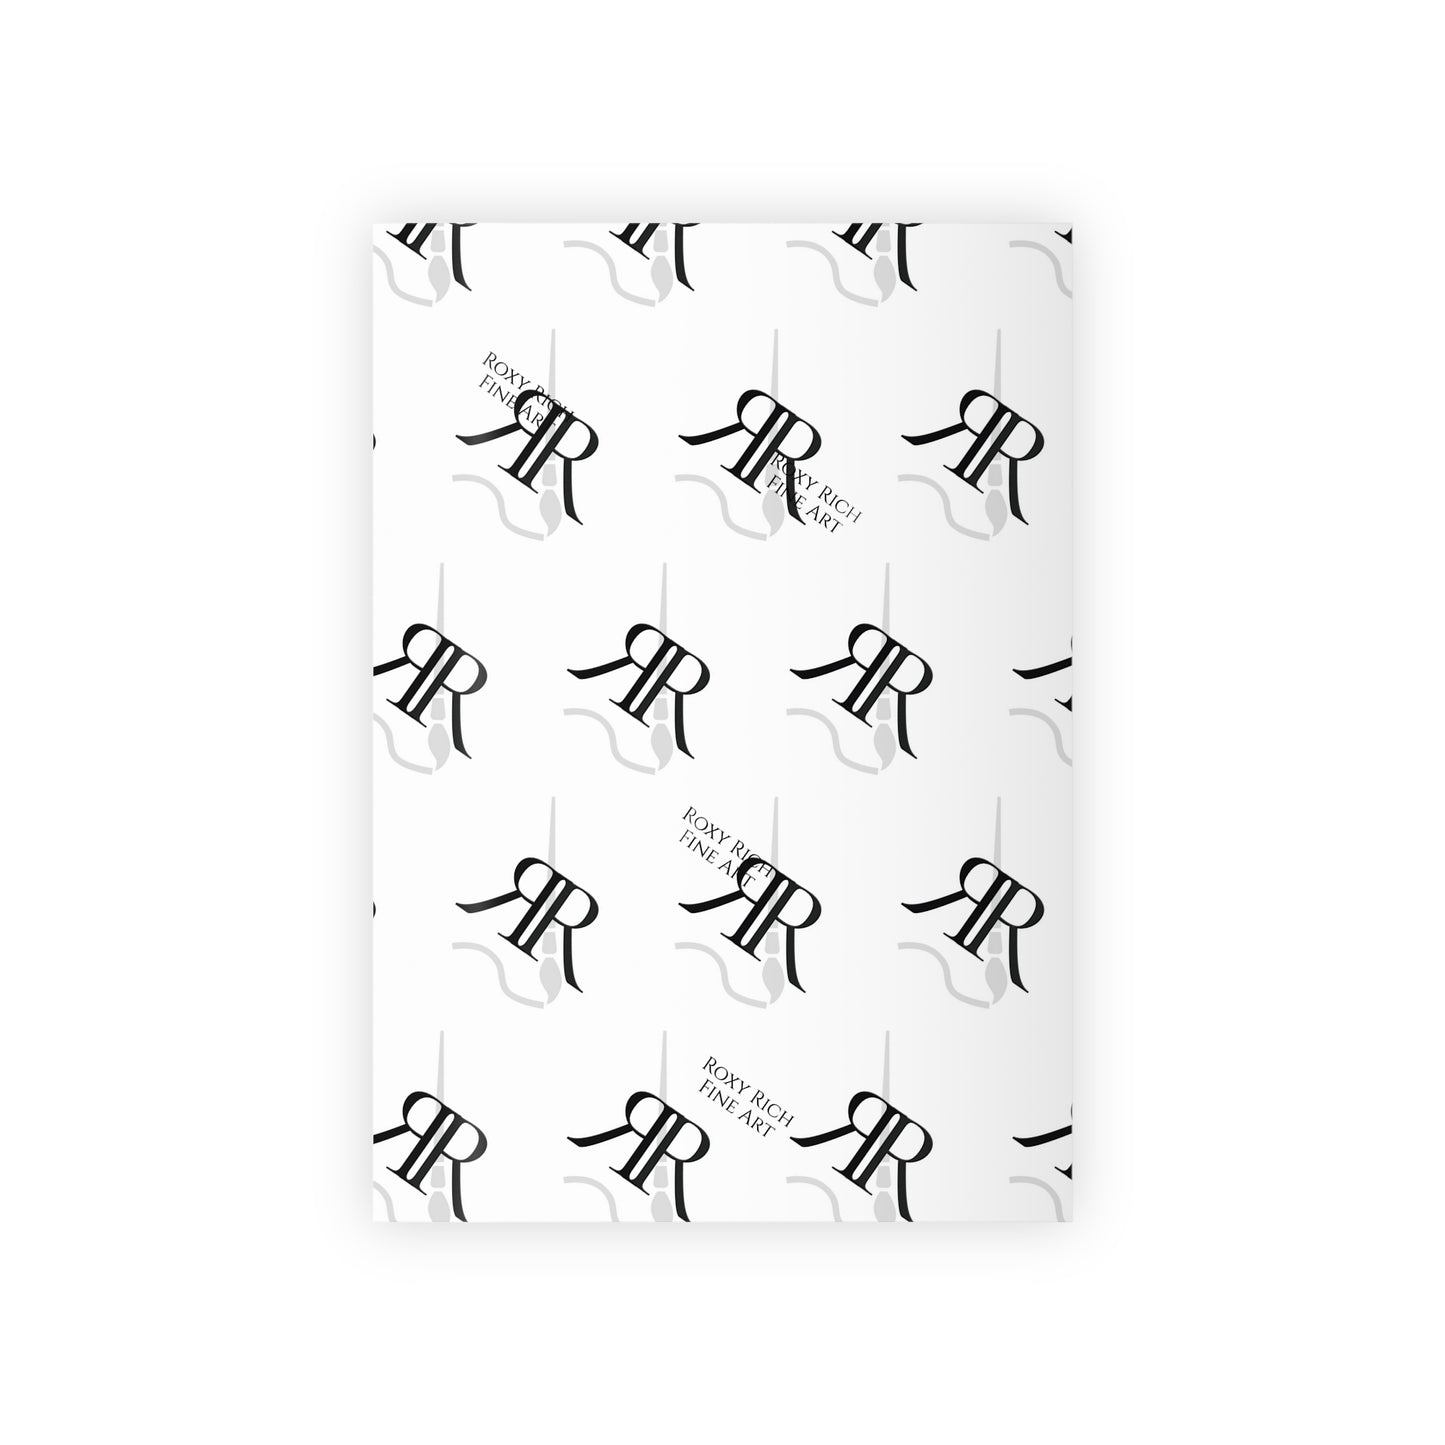 Roxy Rich Double R with Paintbrush Logo Wrapping Paper for Art  printed Gift Wrapping Paper Rolls, 1pc